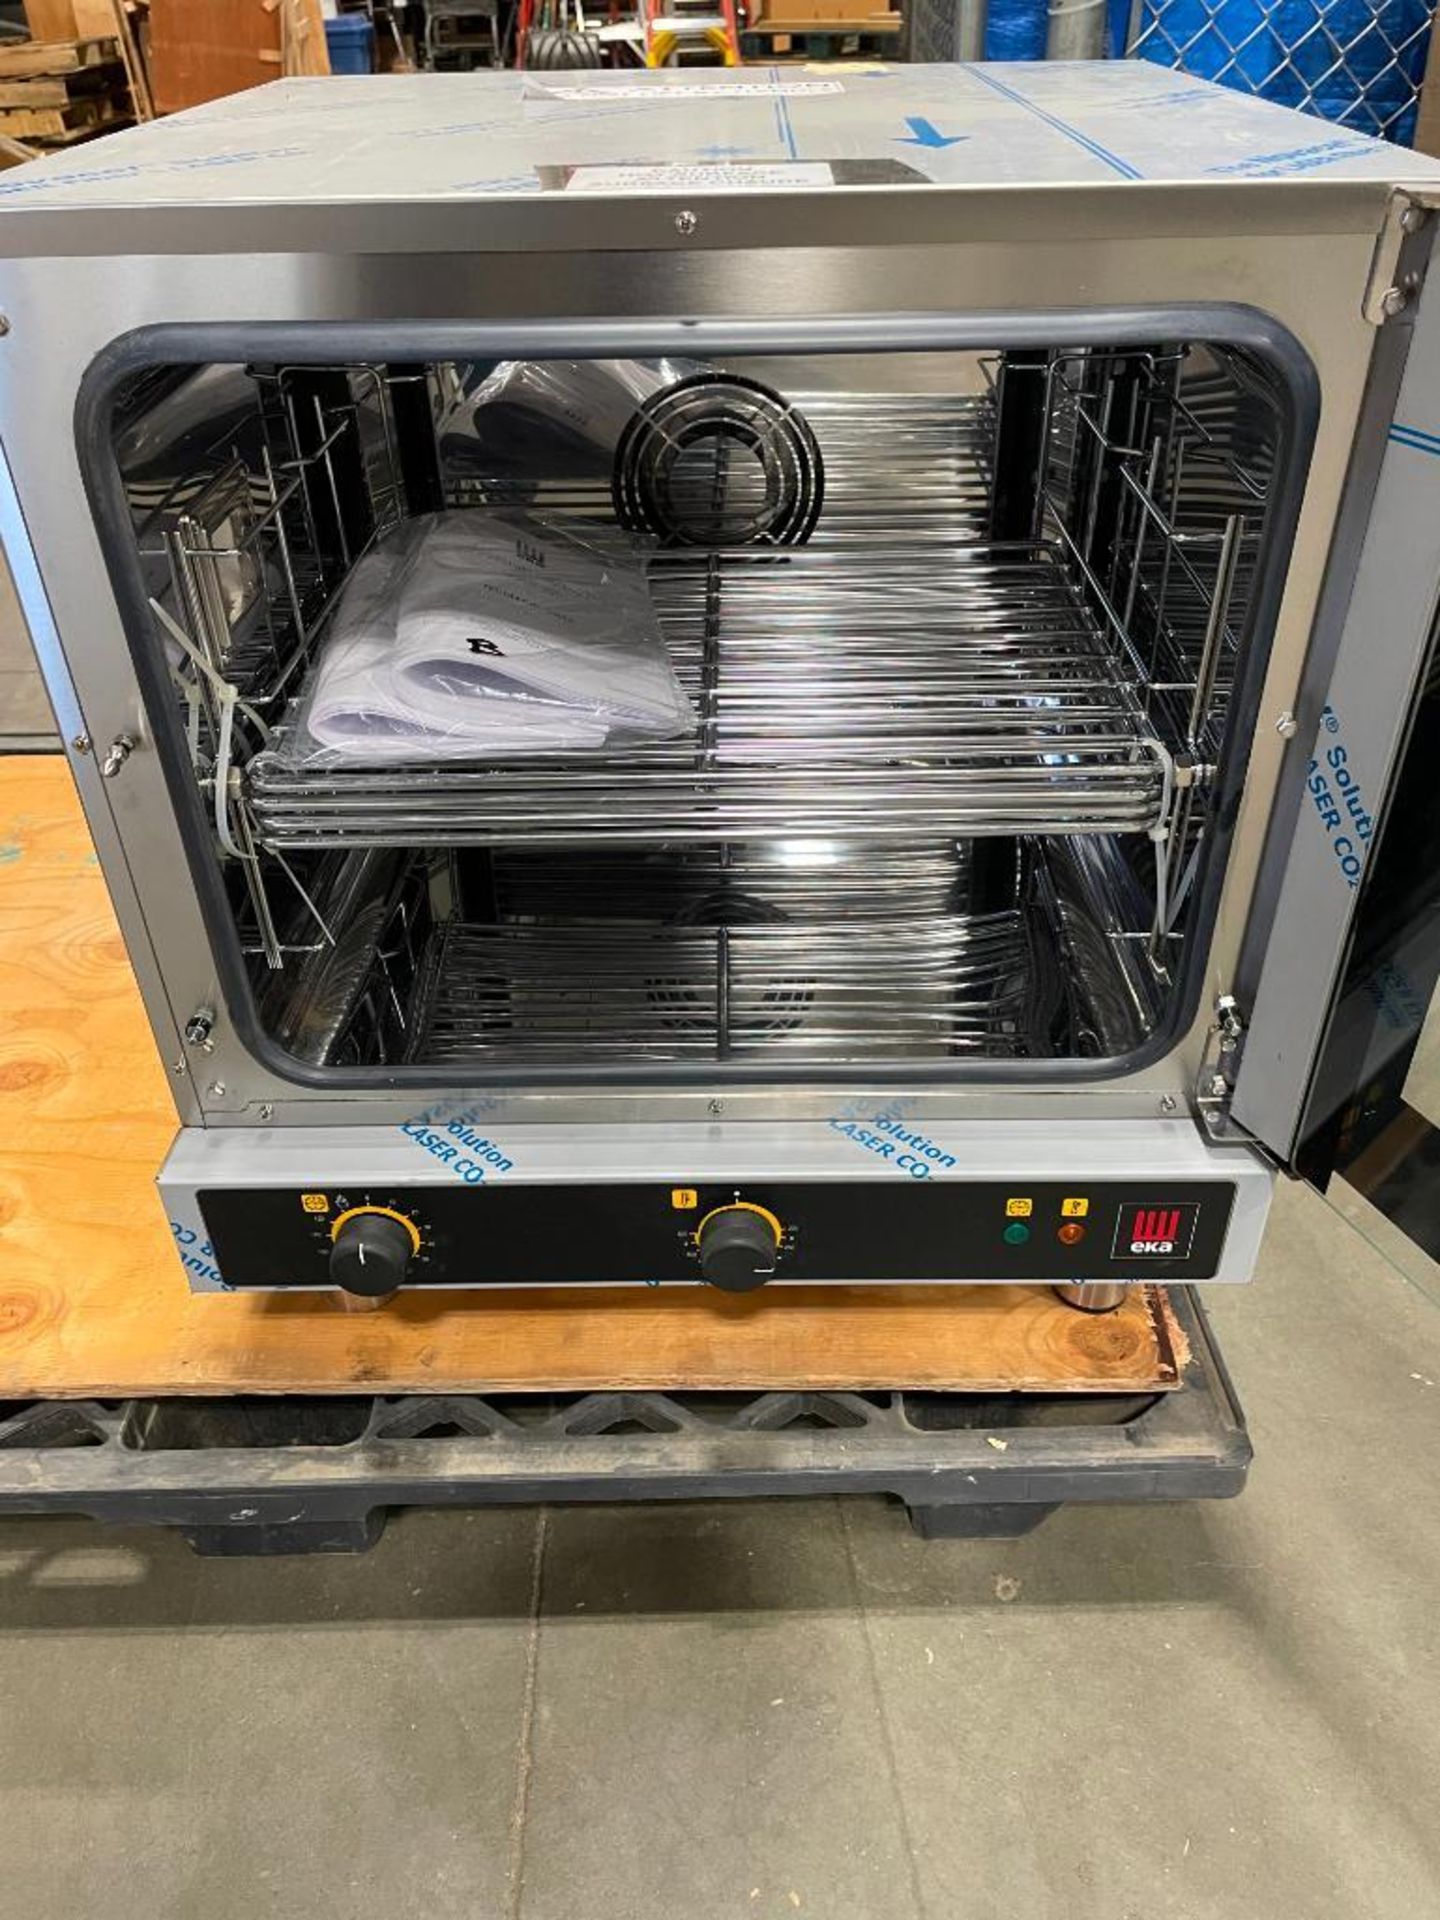 NEW EKFA-412 AL HALF SIZE ELECTRIC CONVECTION OVEN, 208V/1 PHASE - Image 6 of 16